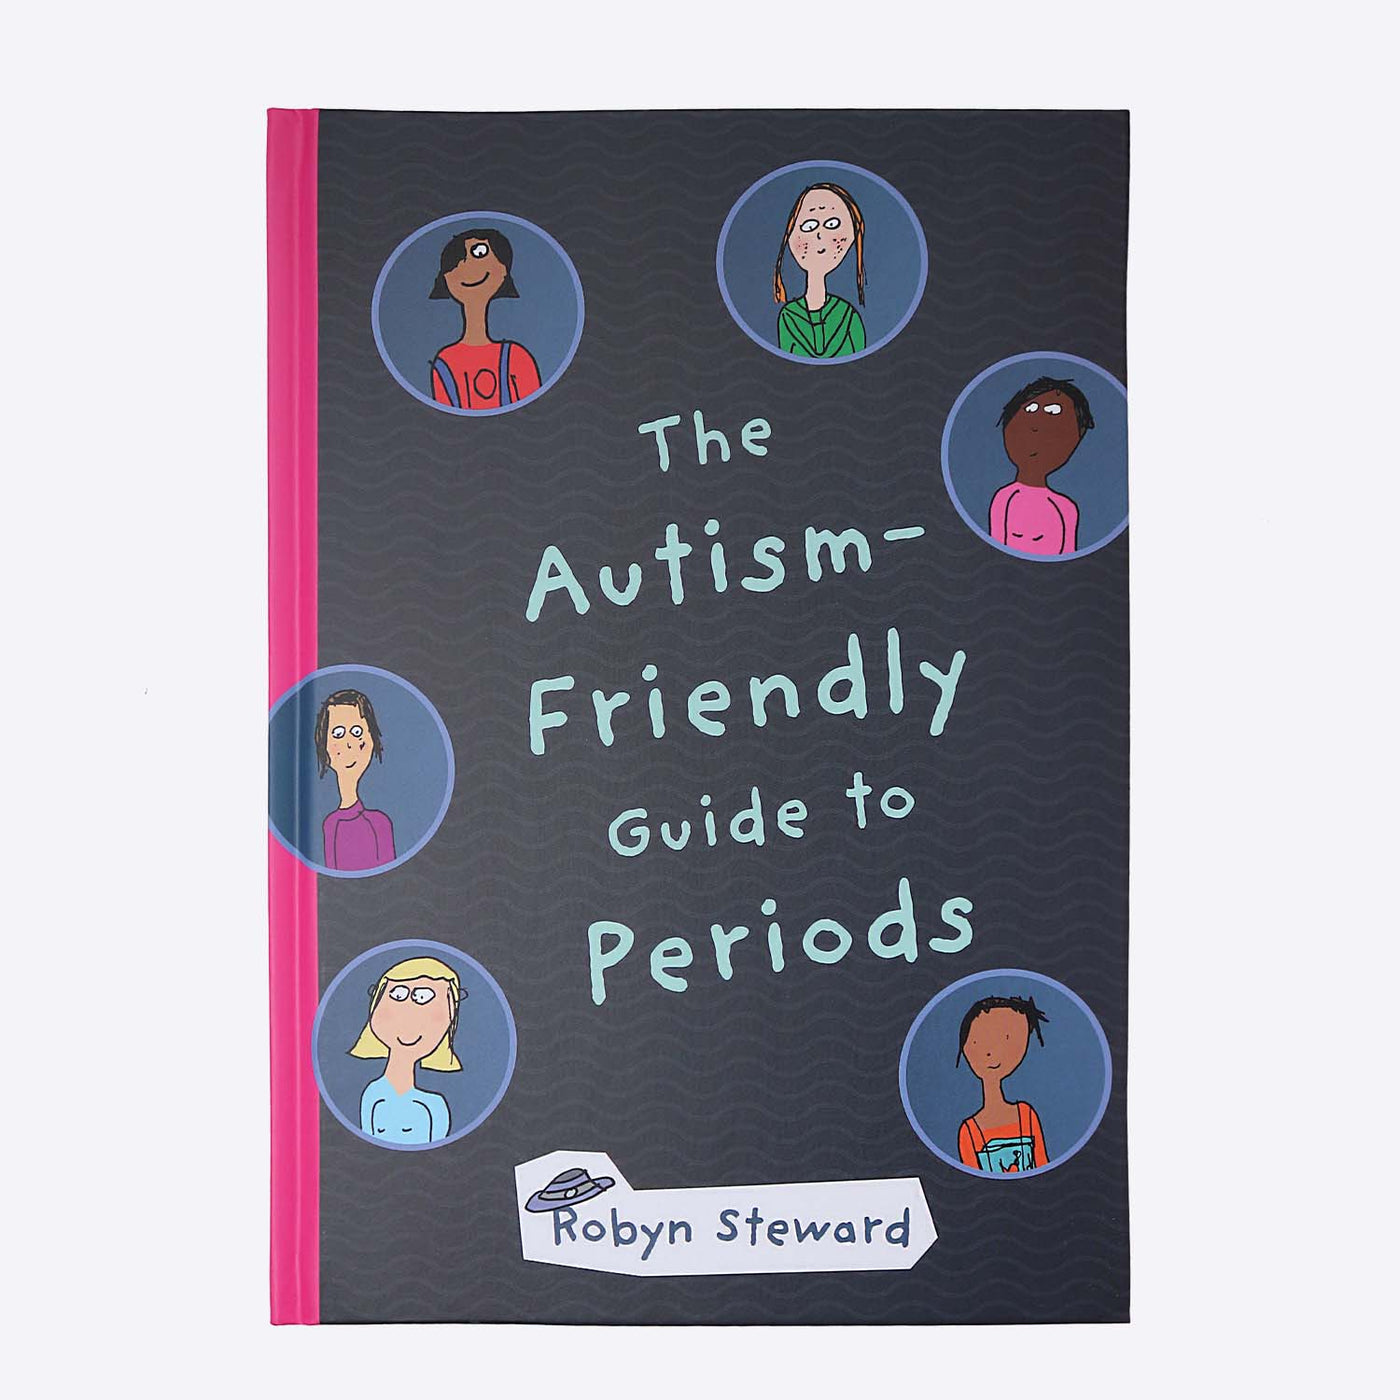 The Autism-Friendly Guide to Periods by Robyn Steward